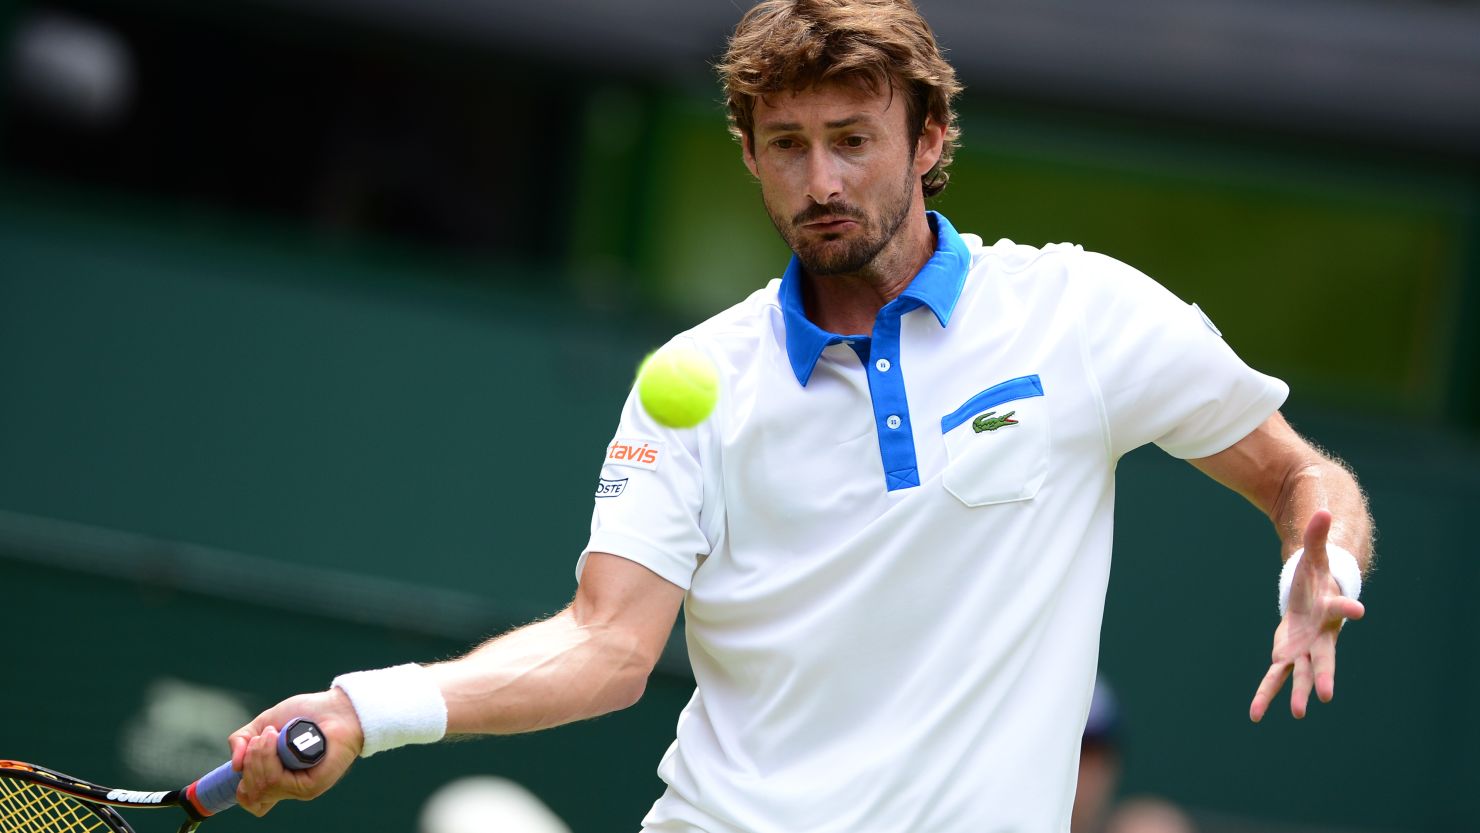 Juan Carlos Ferrero won the French Open and reached the top of the world rankings in 2003.